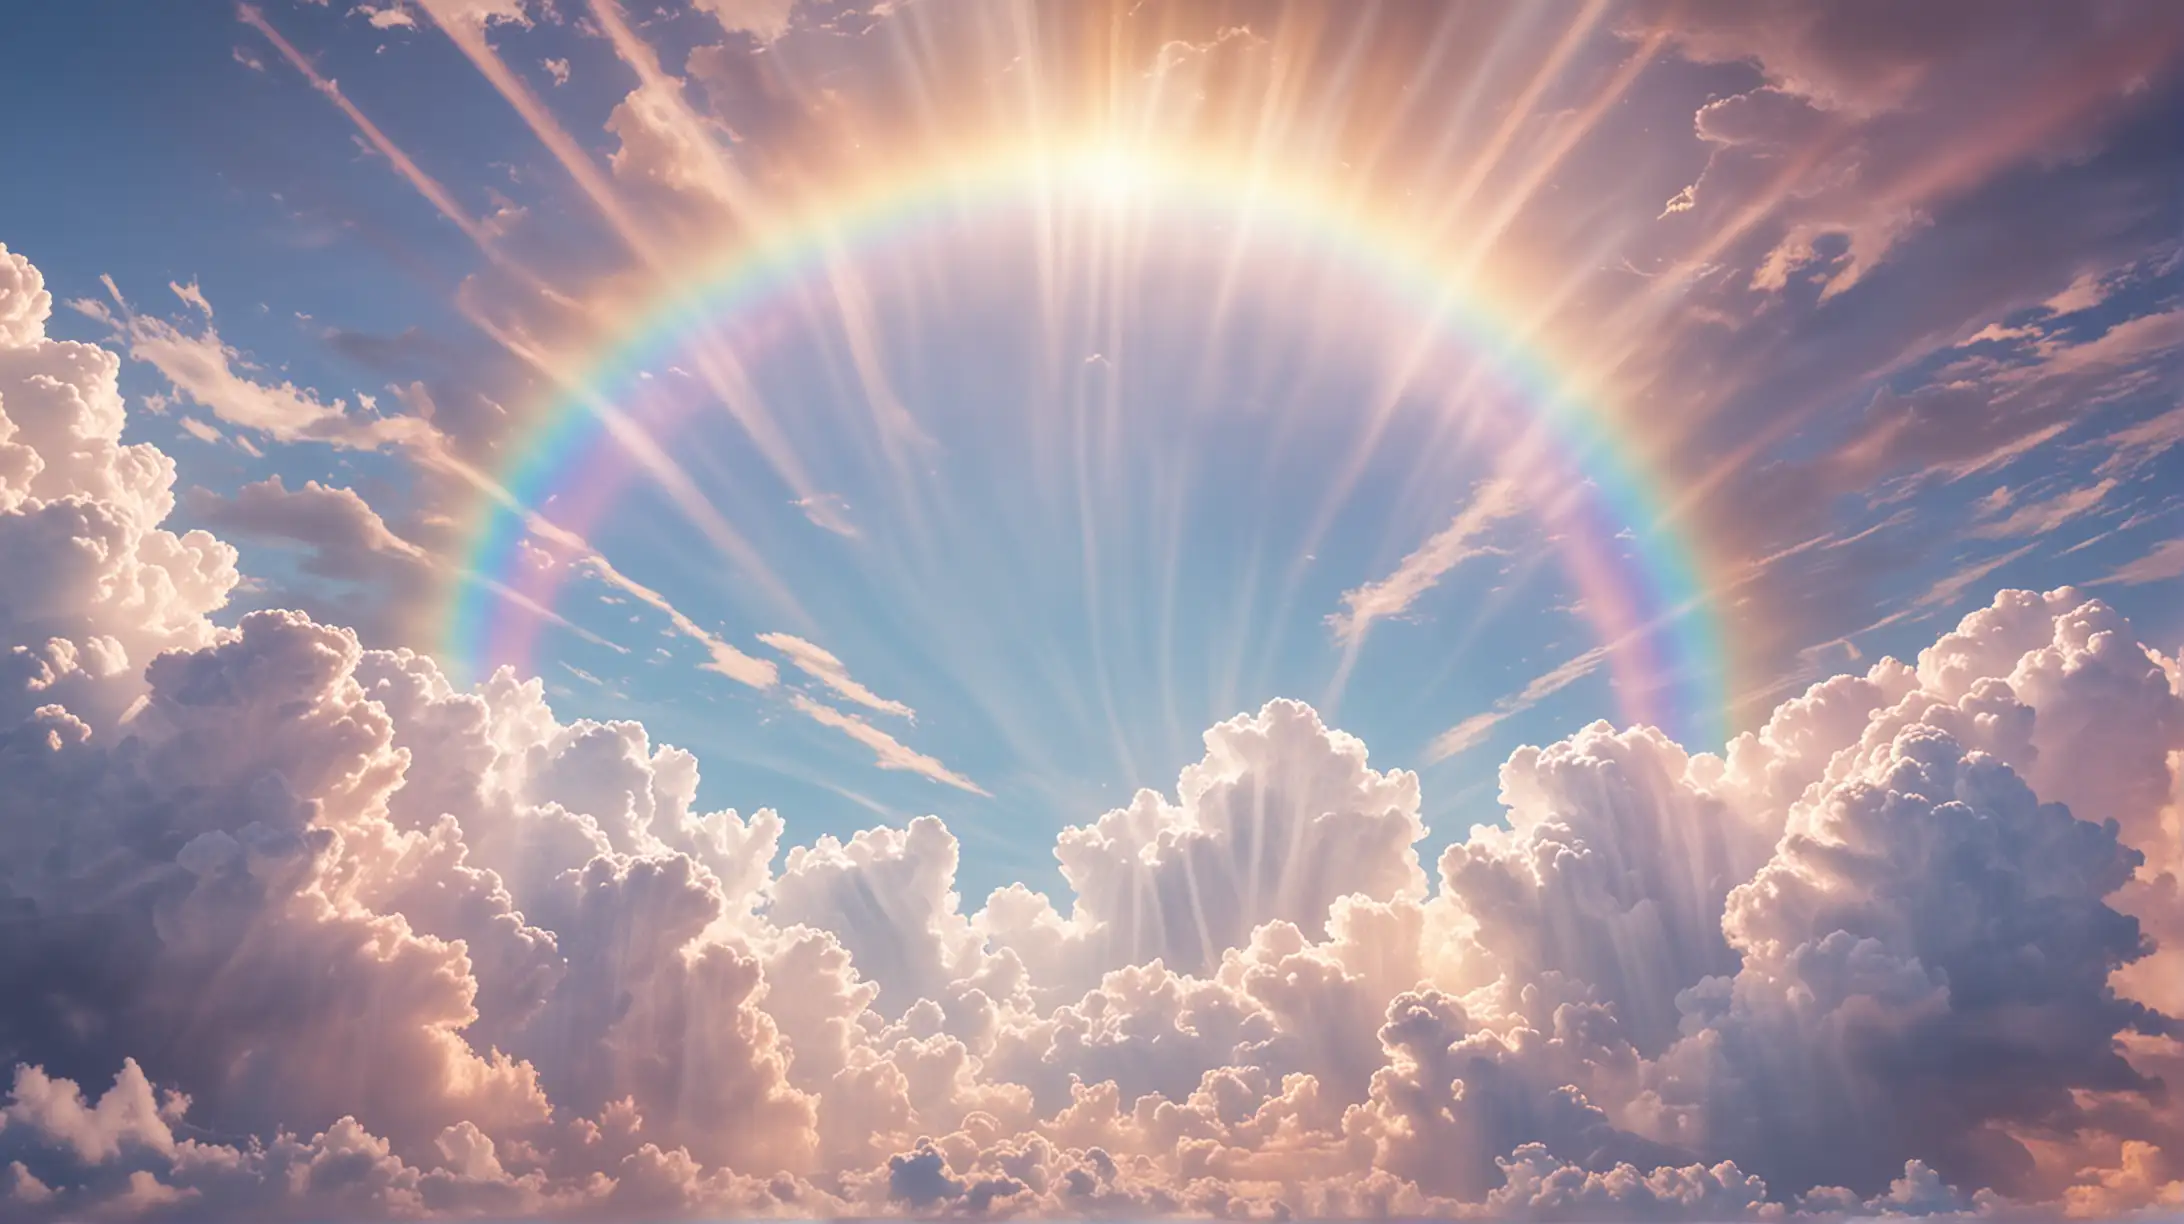 peaceful pastel rainbow ethereal heaven, fluffy clouds, sunbeam with bright white light with rainbow colors ray down center